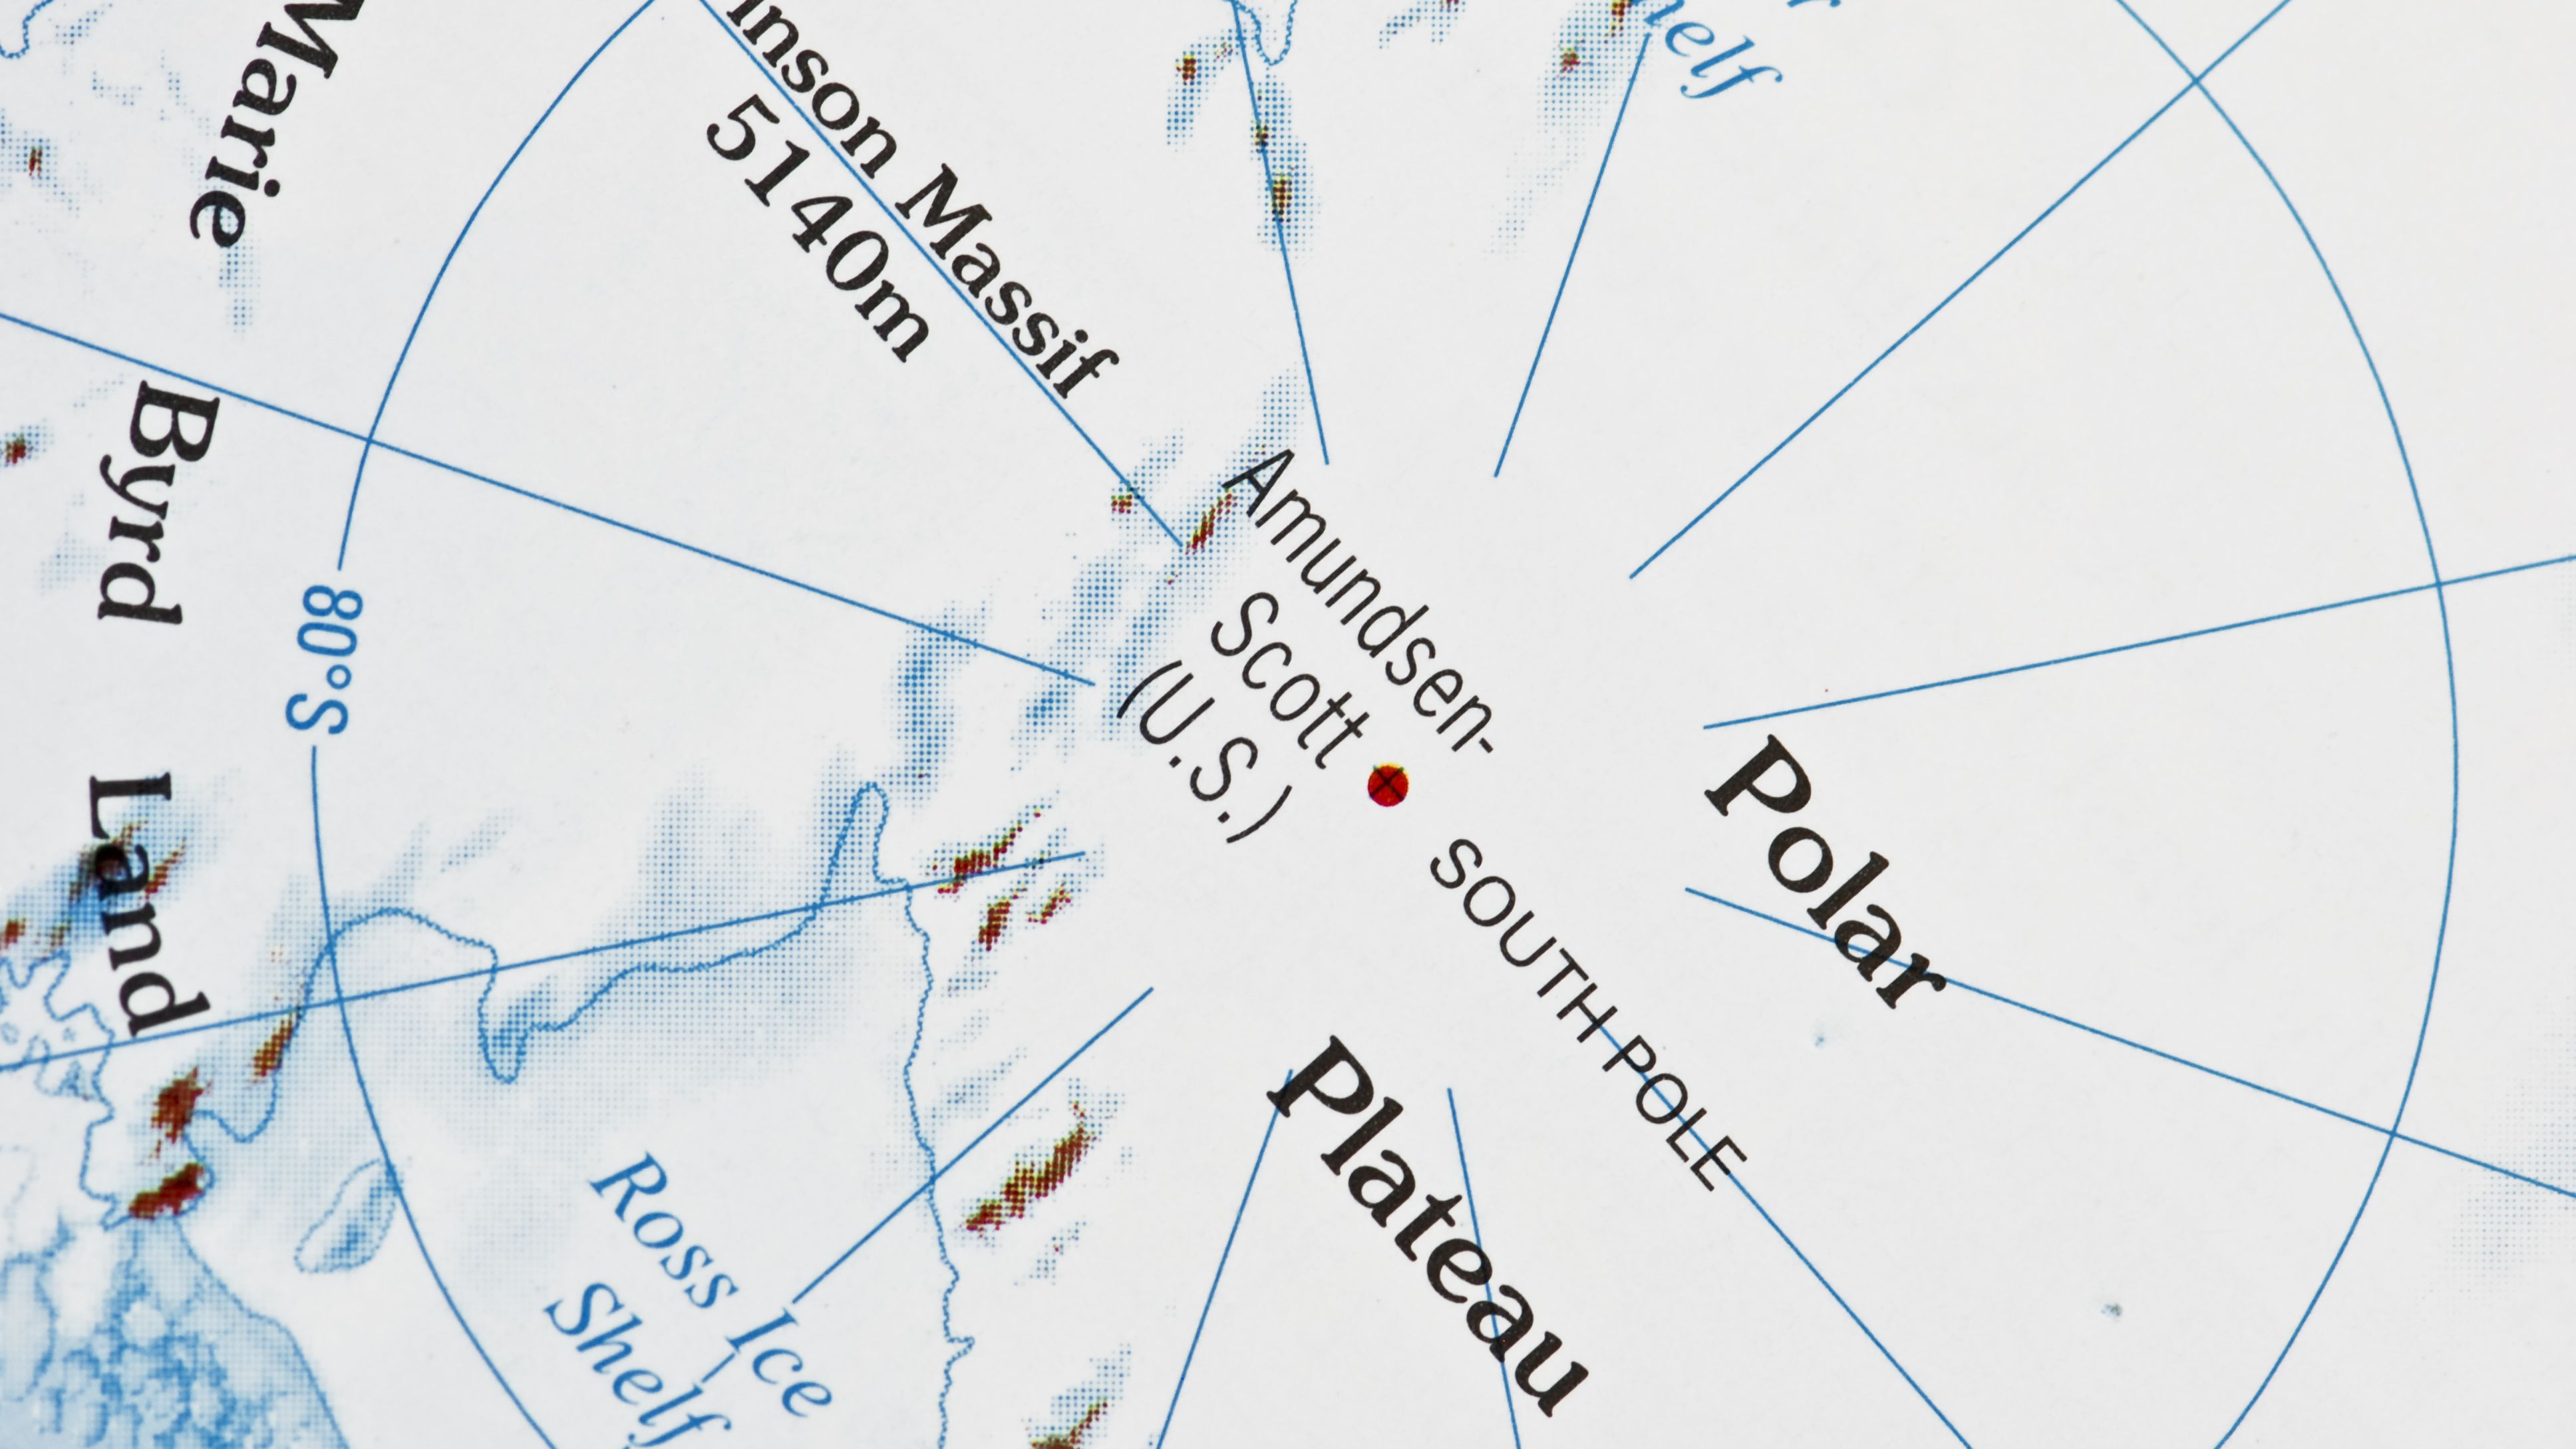 A map of Vinson Massif